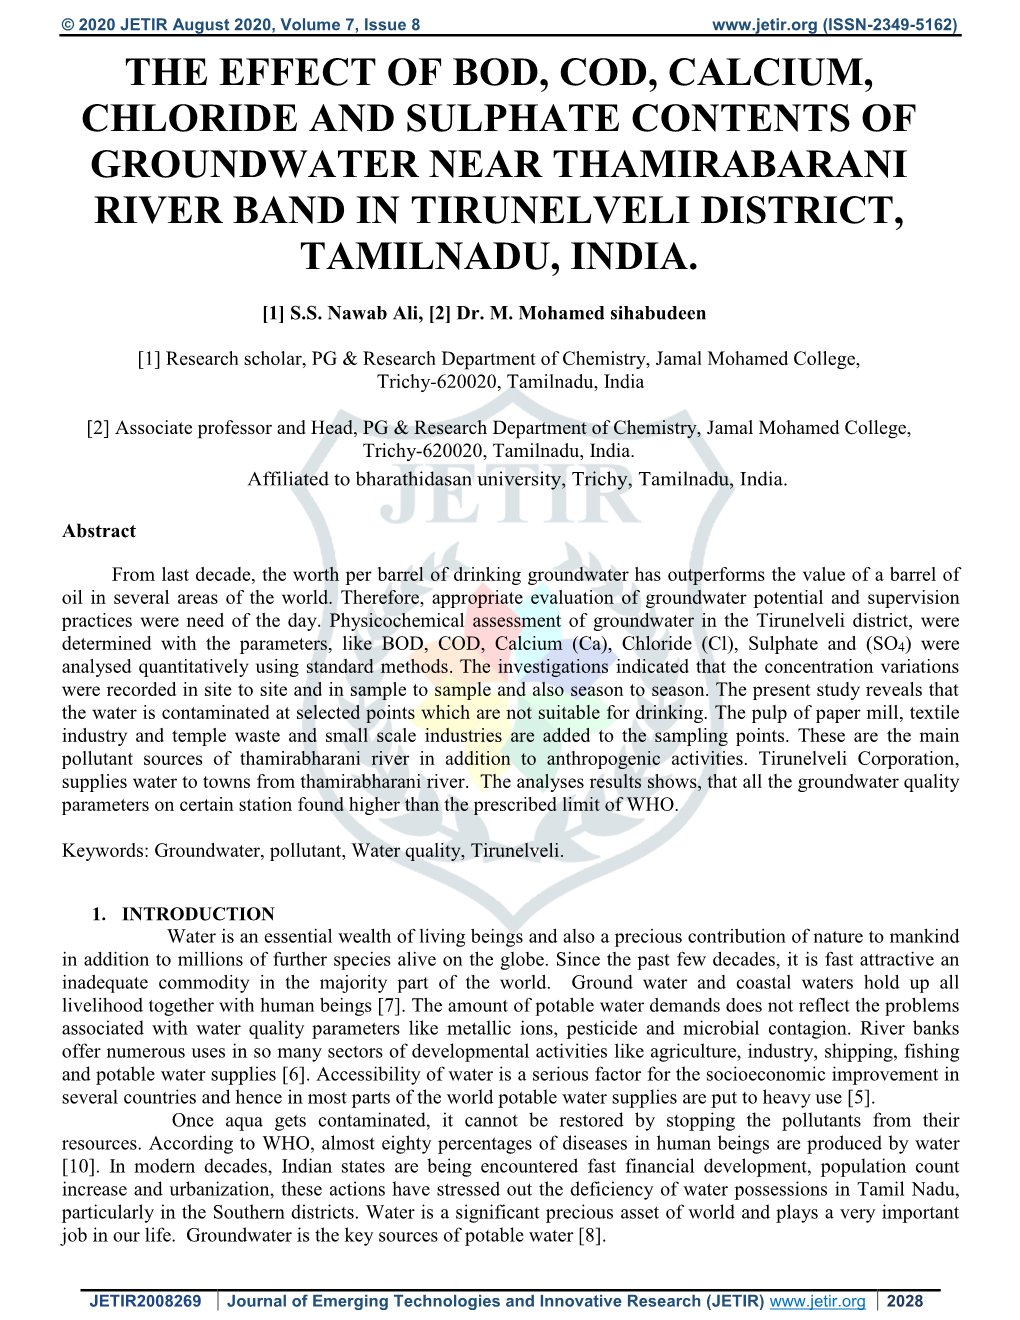 The Effect of Bod, Cod, Calcium, Chloride and Sulphate Contents of Groundwater Near Thamirabarani River Band in Tirunelveli District, Tamilnadu, India